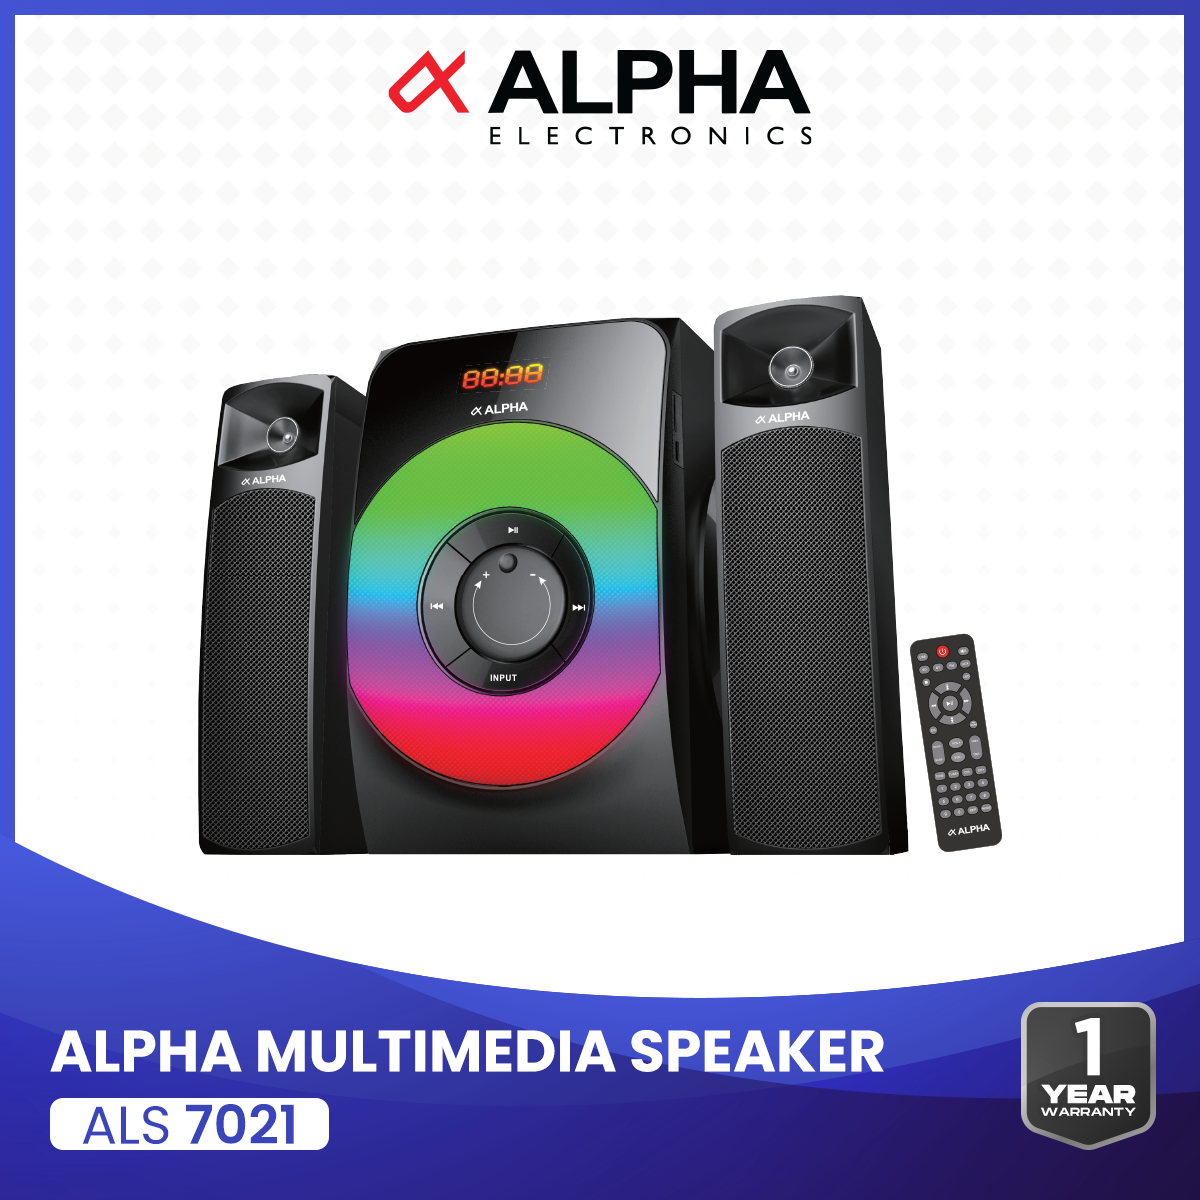 Portable Speakers Archives - Alpha International Company Limited